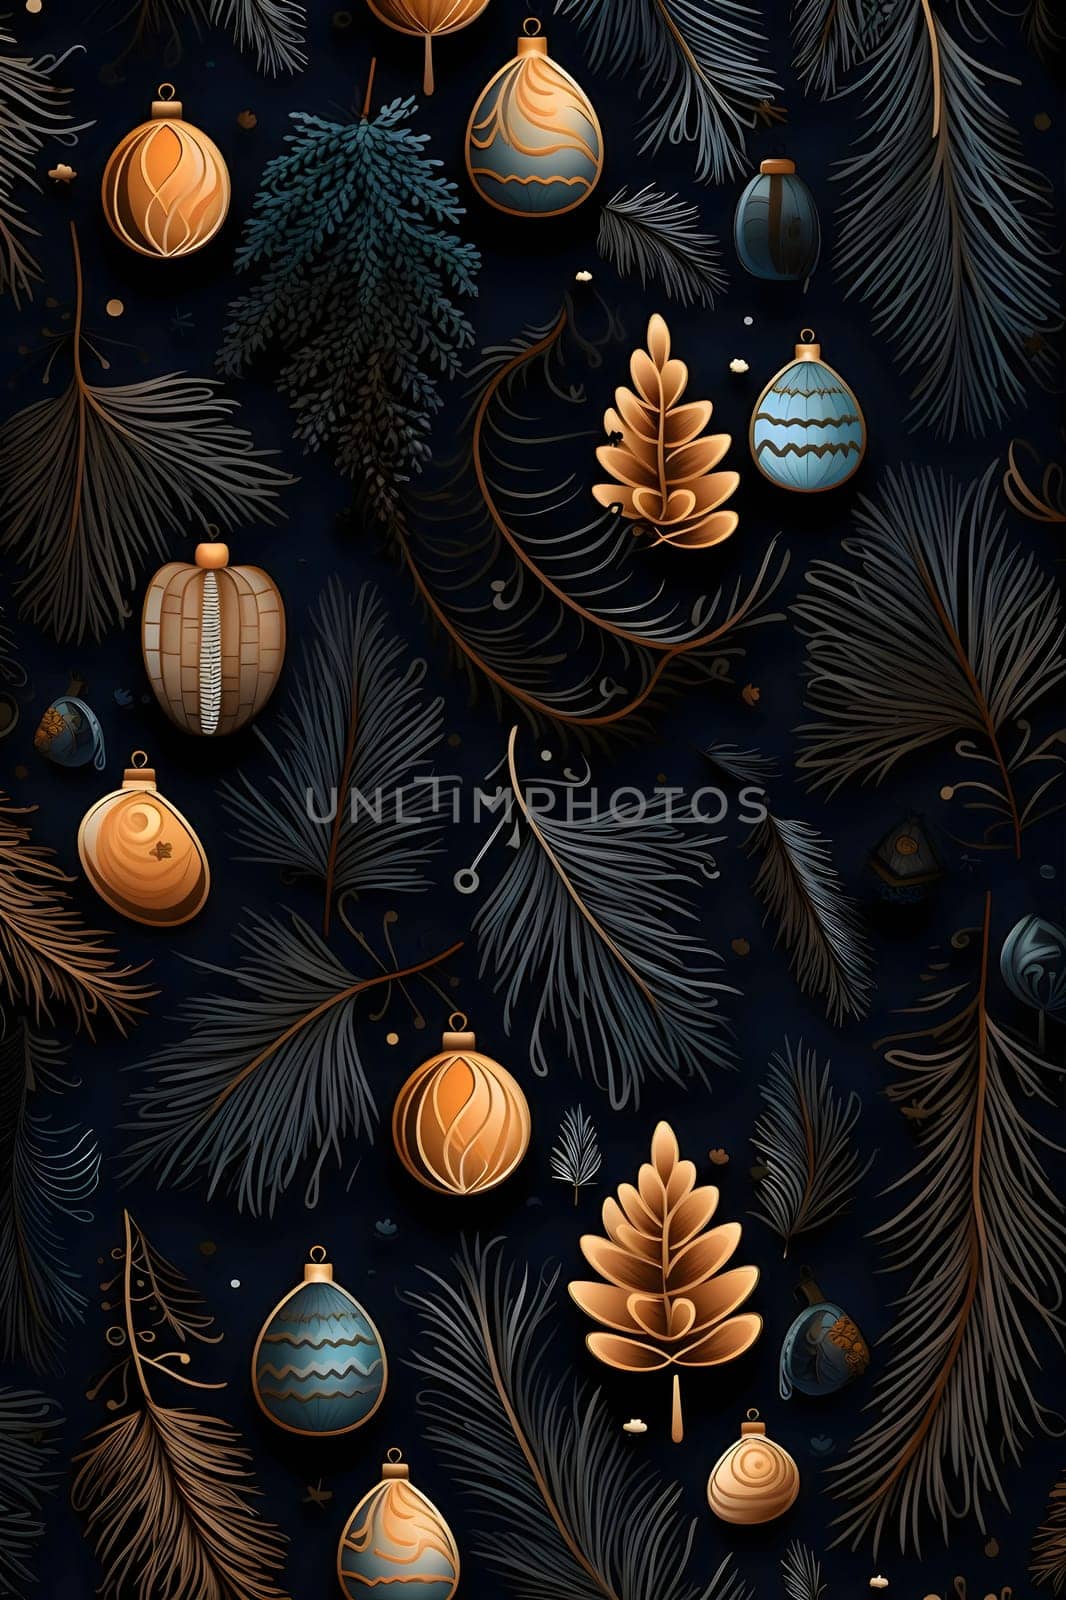 Baubles and spruce branches as abstract background, wallpaper, banner, texture design with pattern - vector. Dark colors. by ThemesS